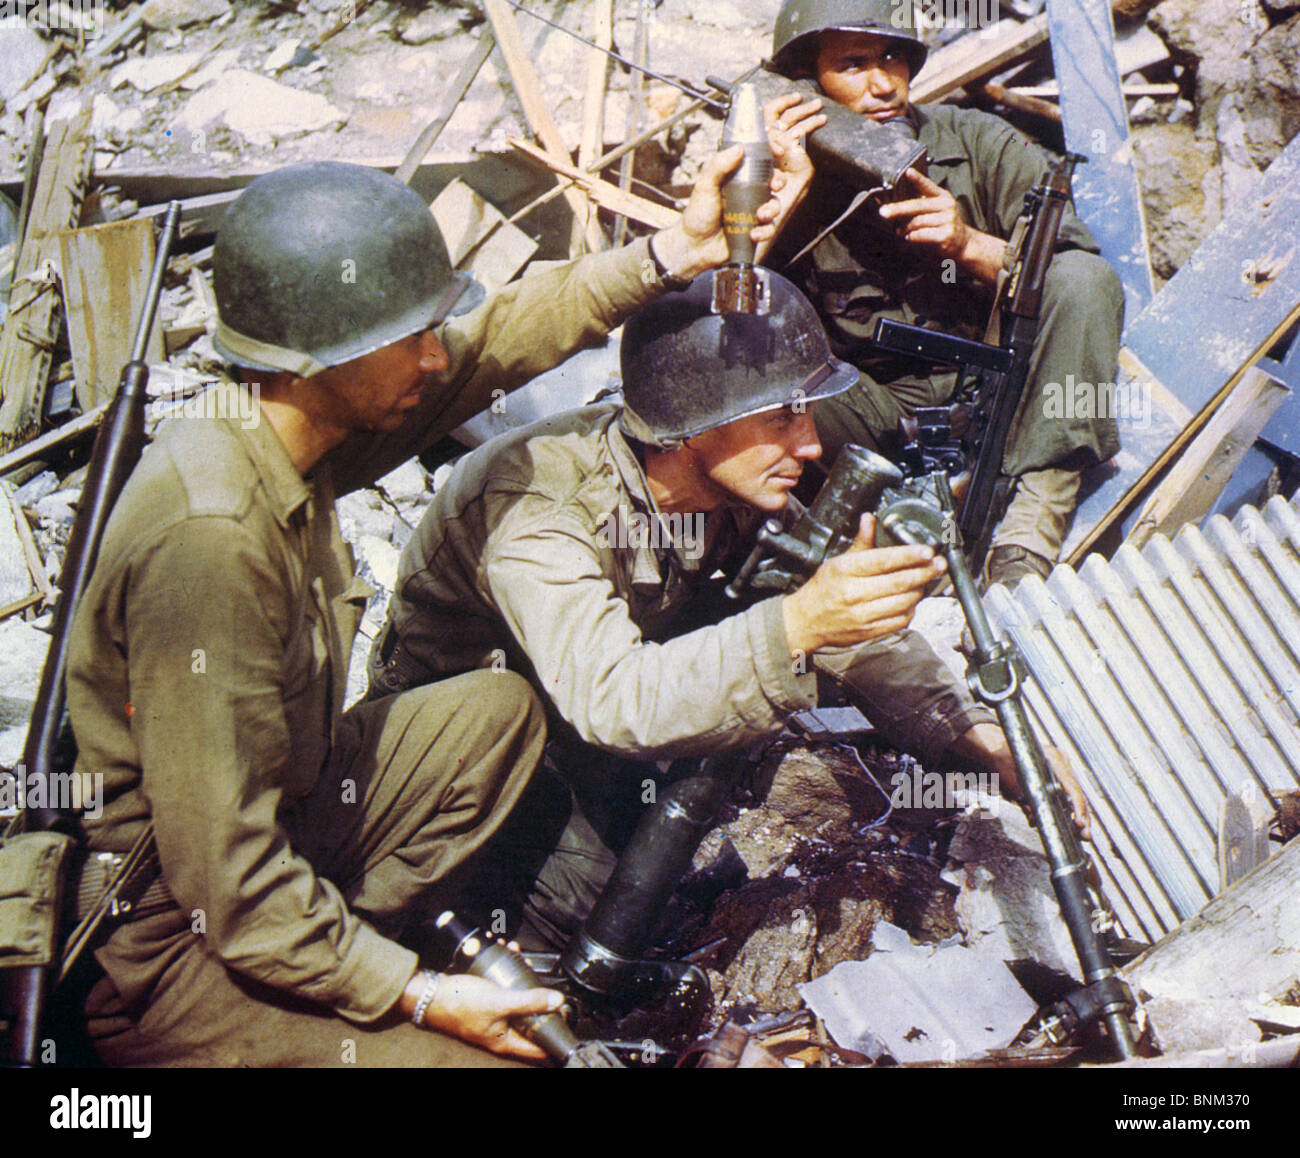 Us Army Mortar Team During Ww2 Stock Photo Royalty Free Image